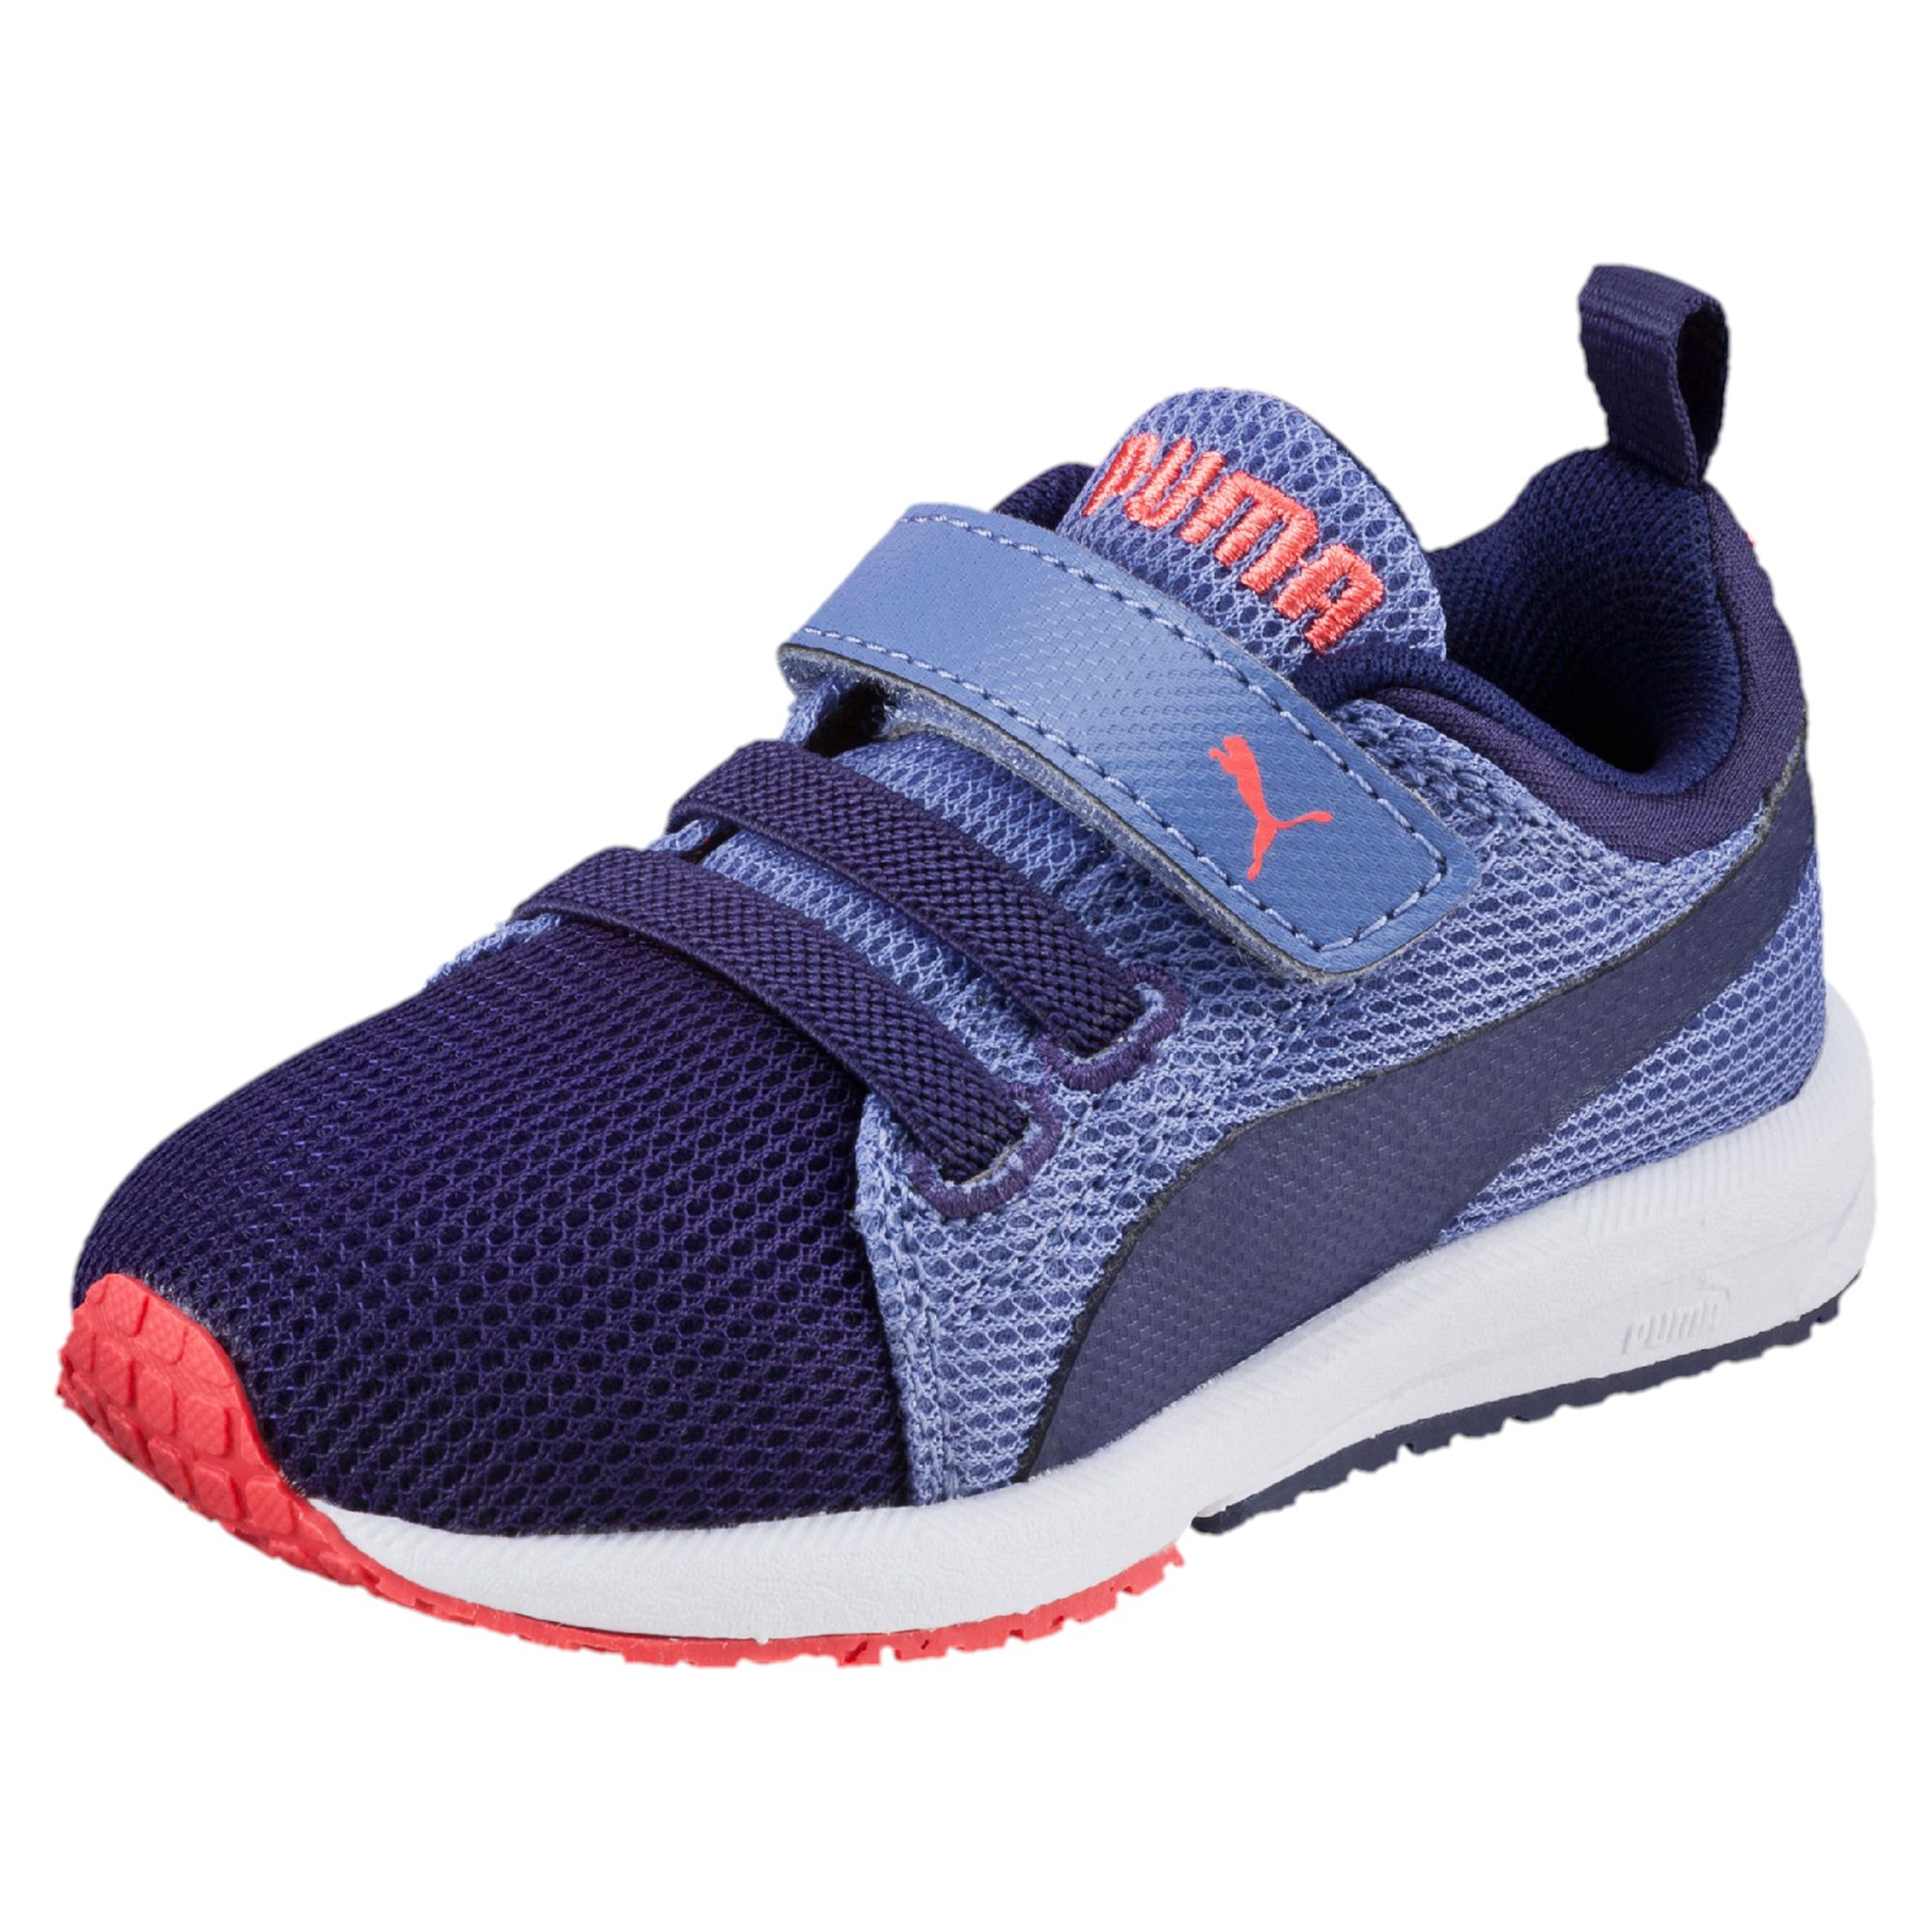 home kids boys shoes youth running carson runner kids running shoes